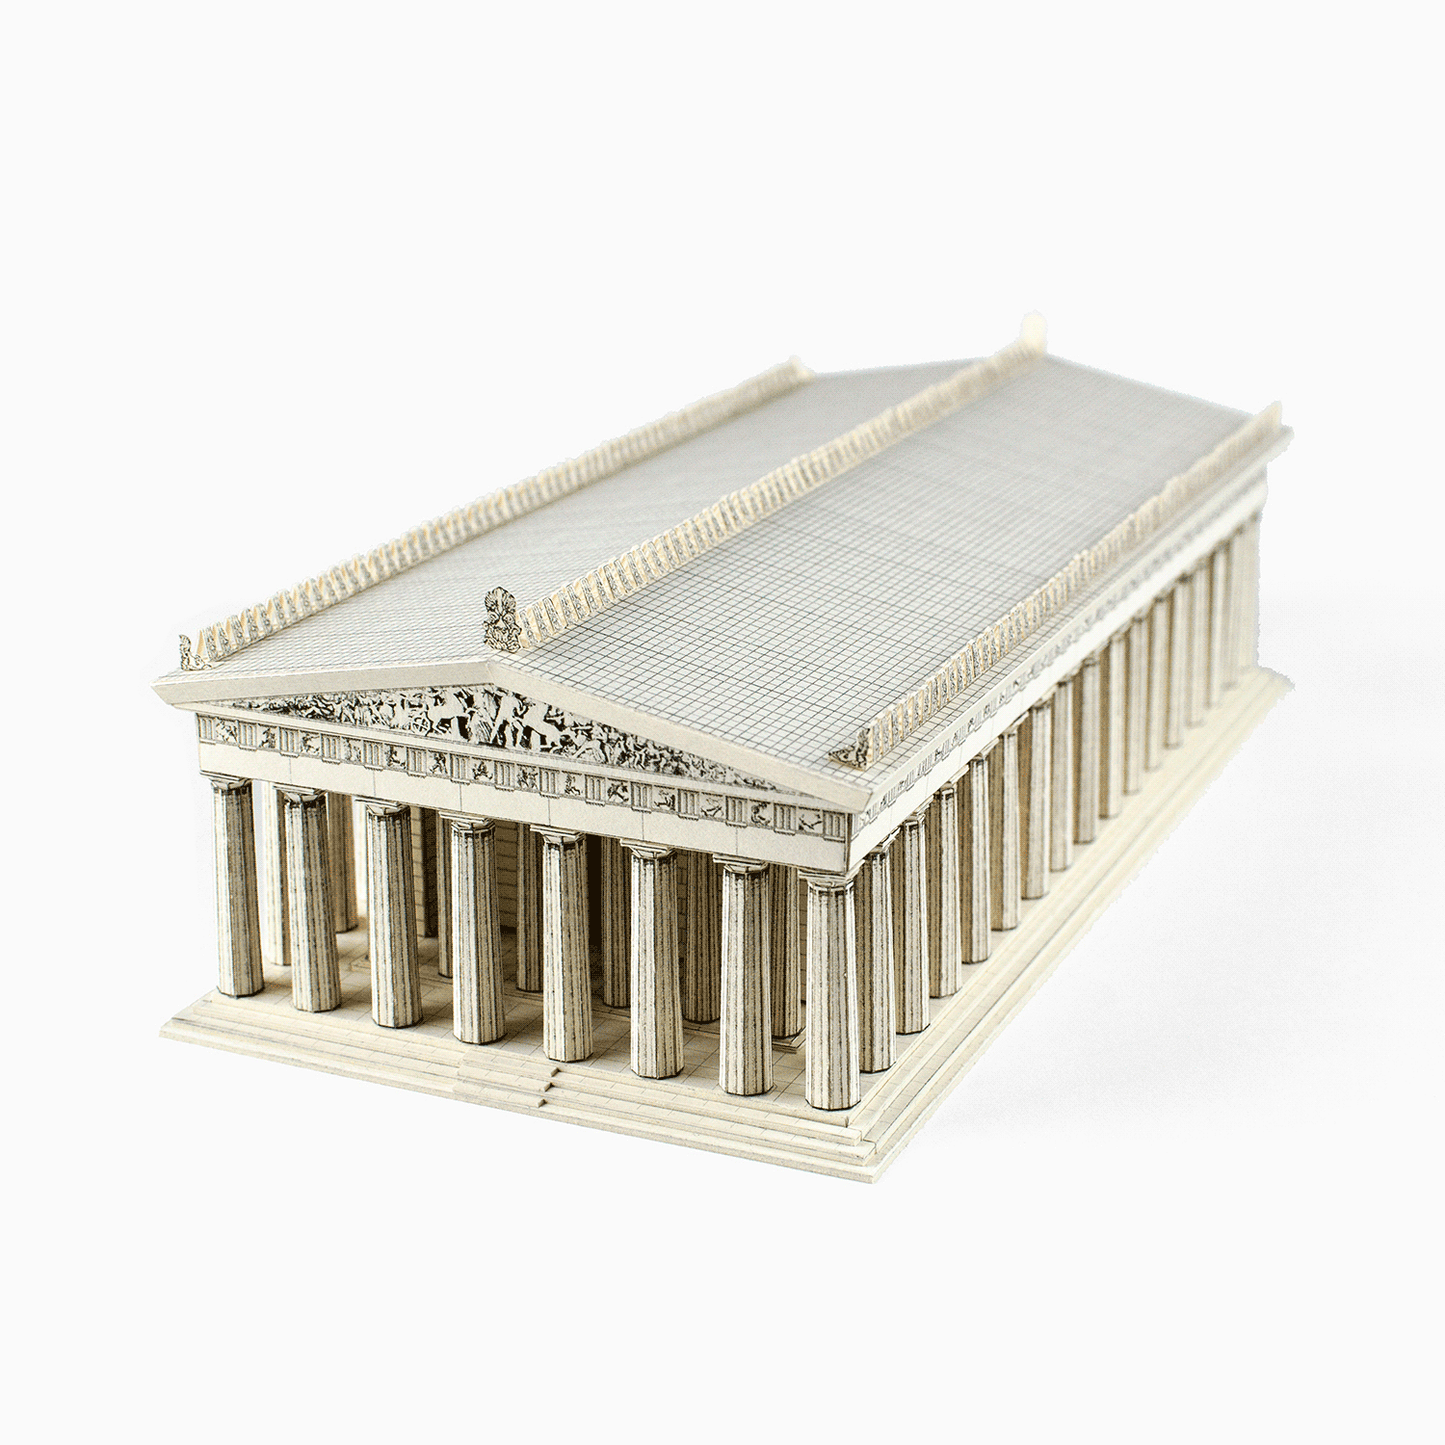 Parthenon Paper Model by PaperLandmarks Ancient Architecture